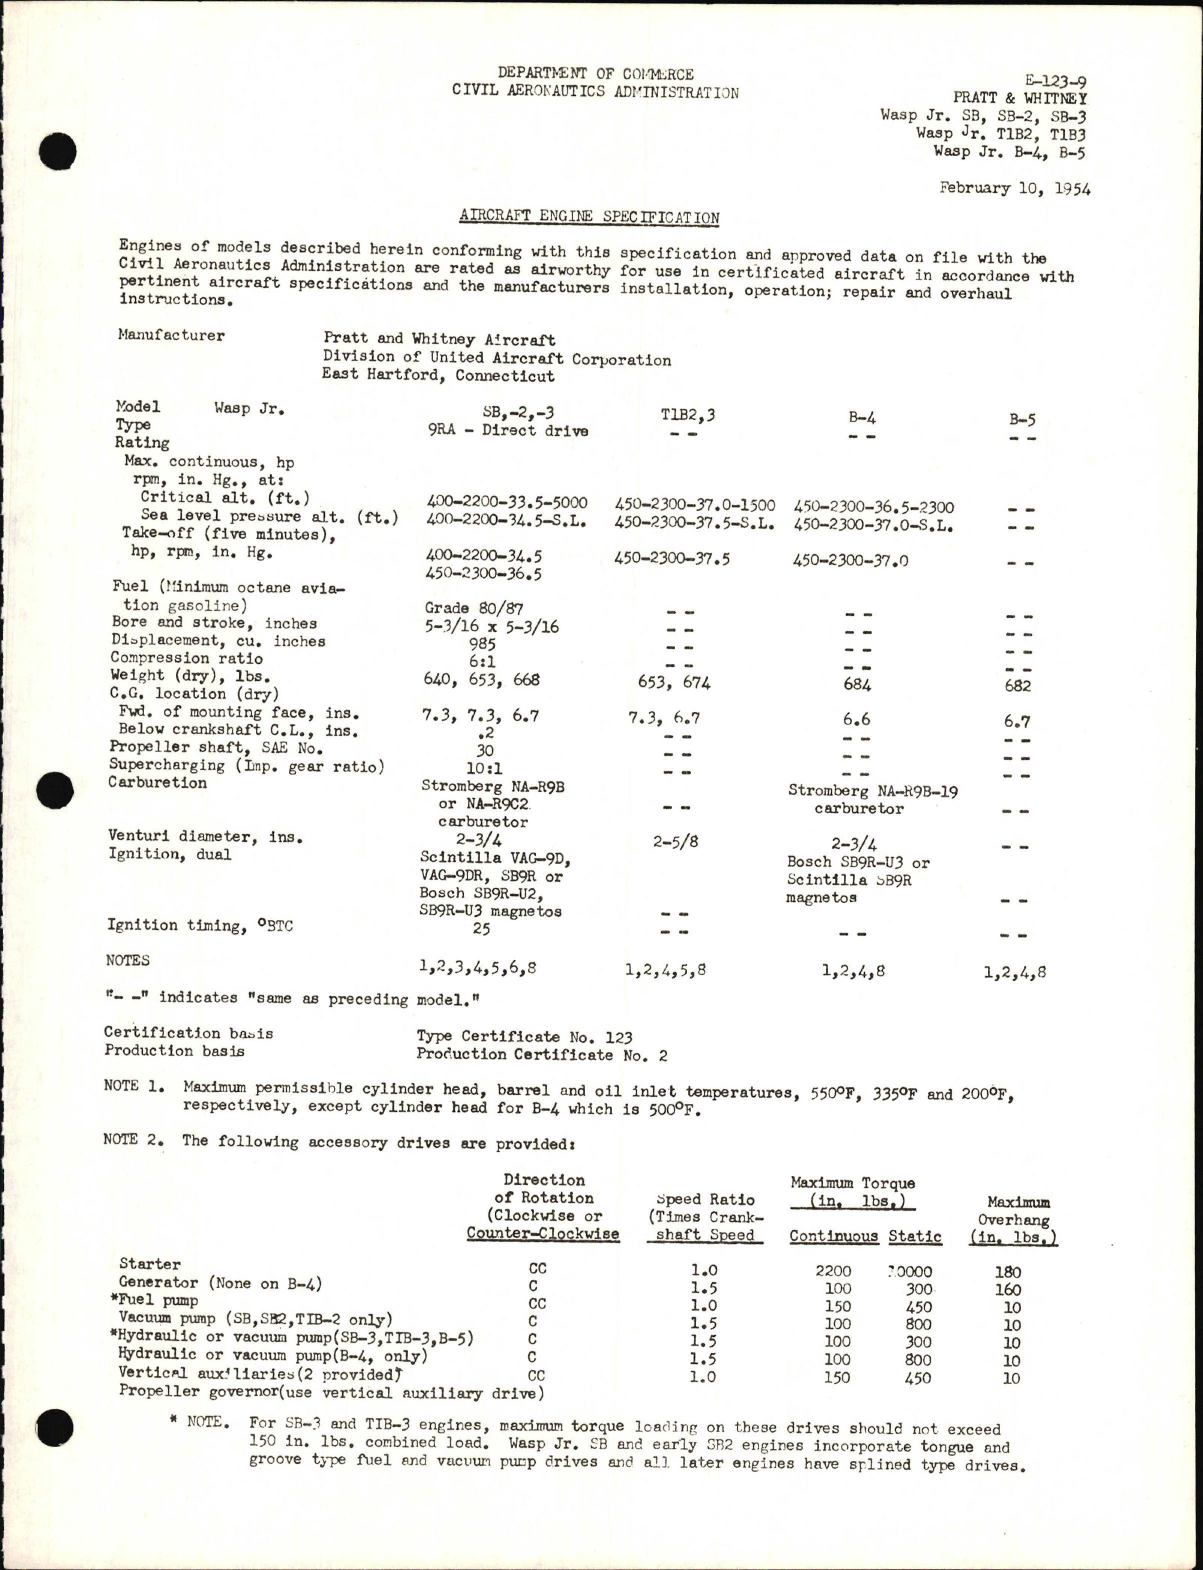 Sample page 1 from AirCorps Library document: SB, T1B, B-4, B-5 Wasp Jr. 